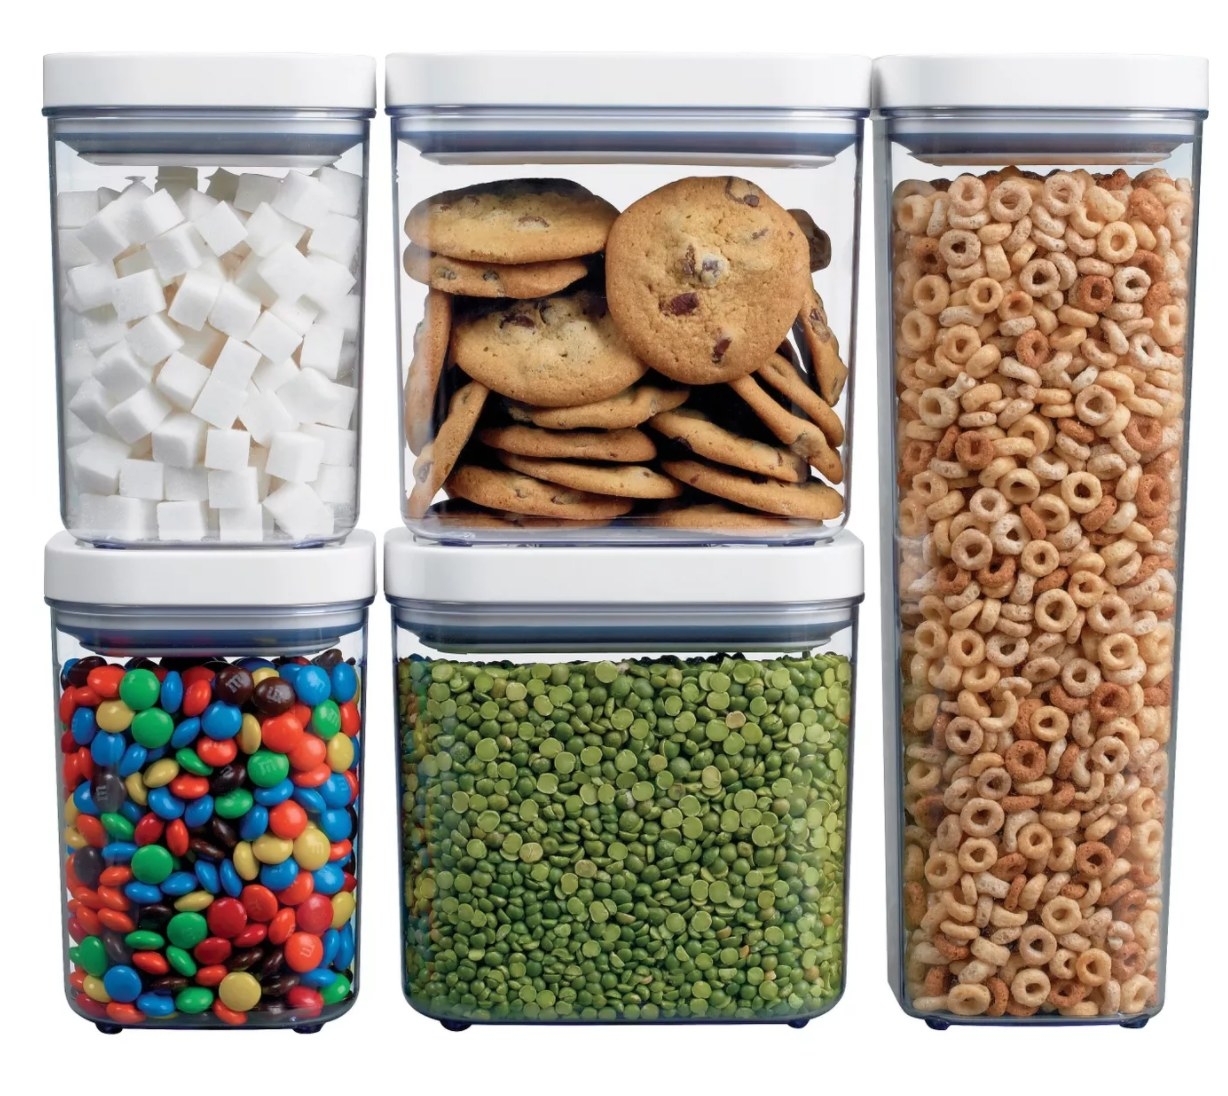 The clear food storage containers